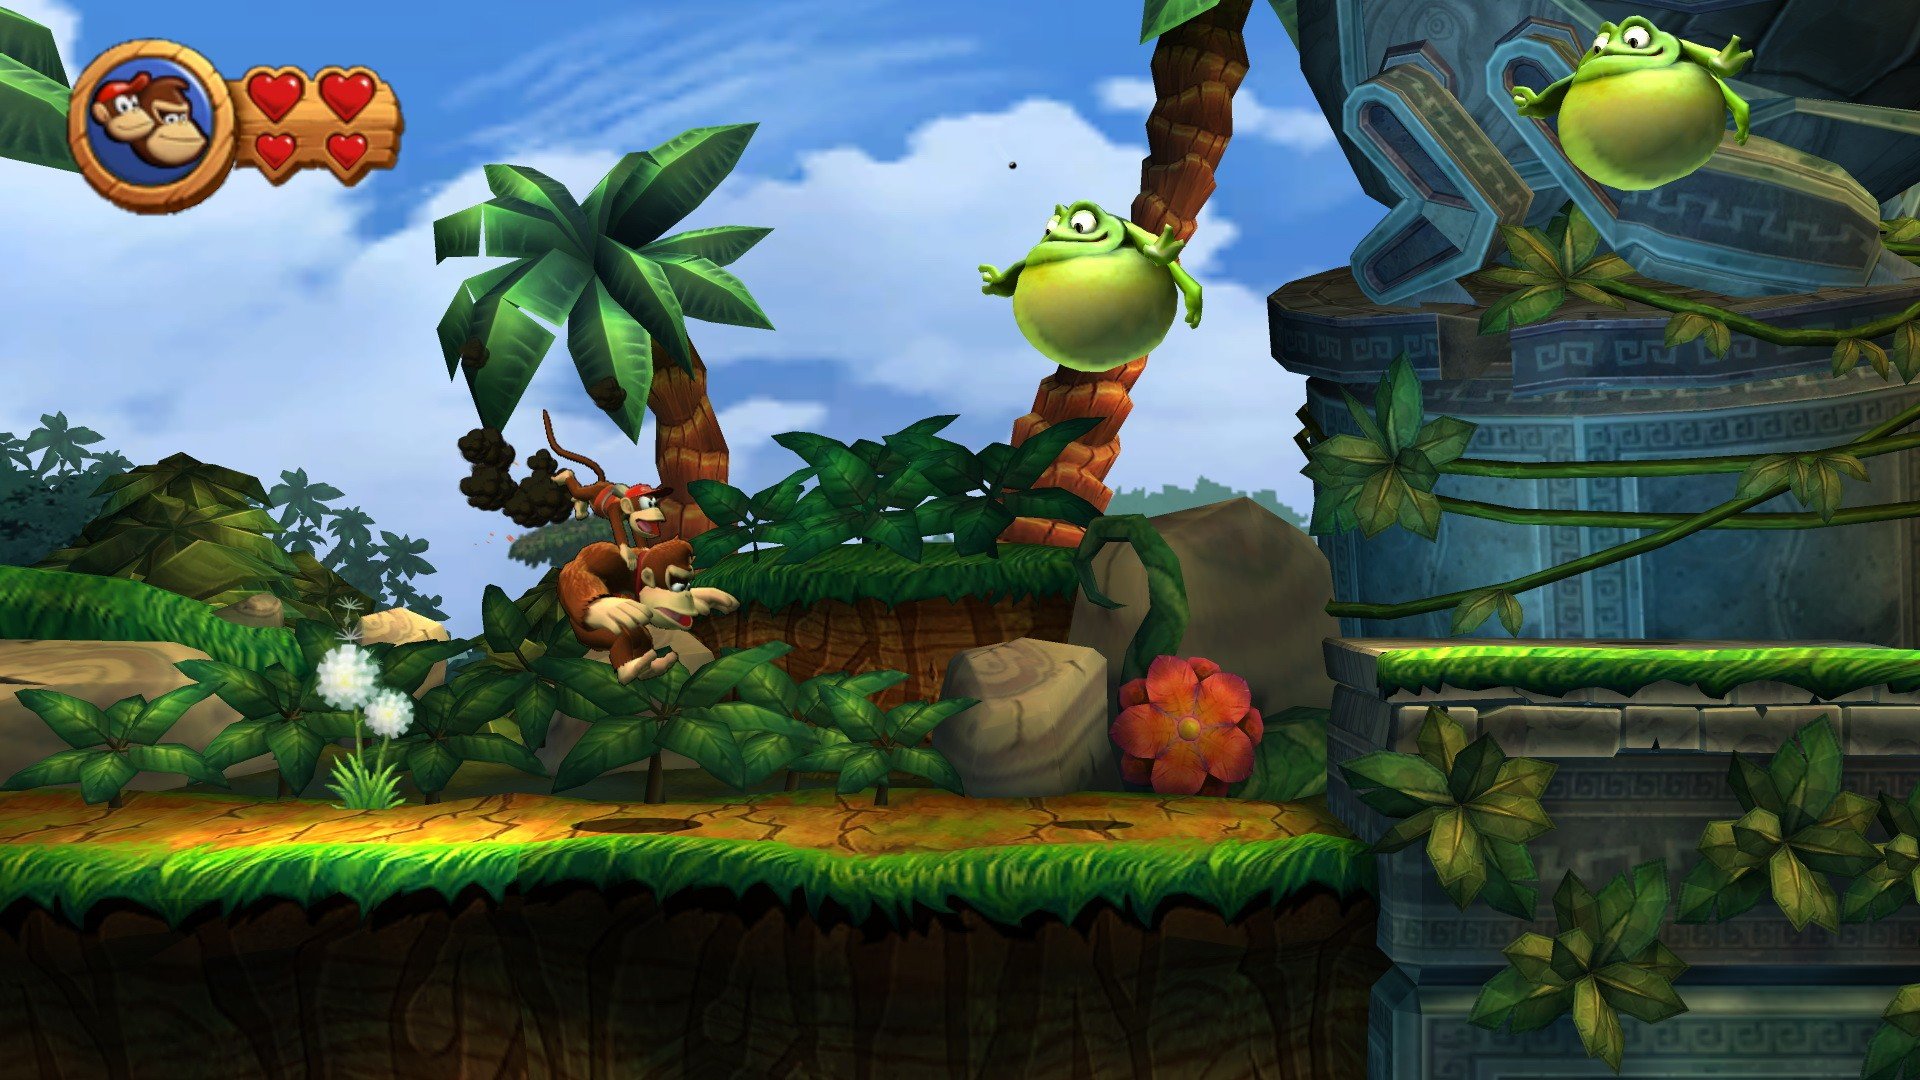 Download 1080p Donkey Kong computer wallpaper ID:319552 for free